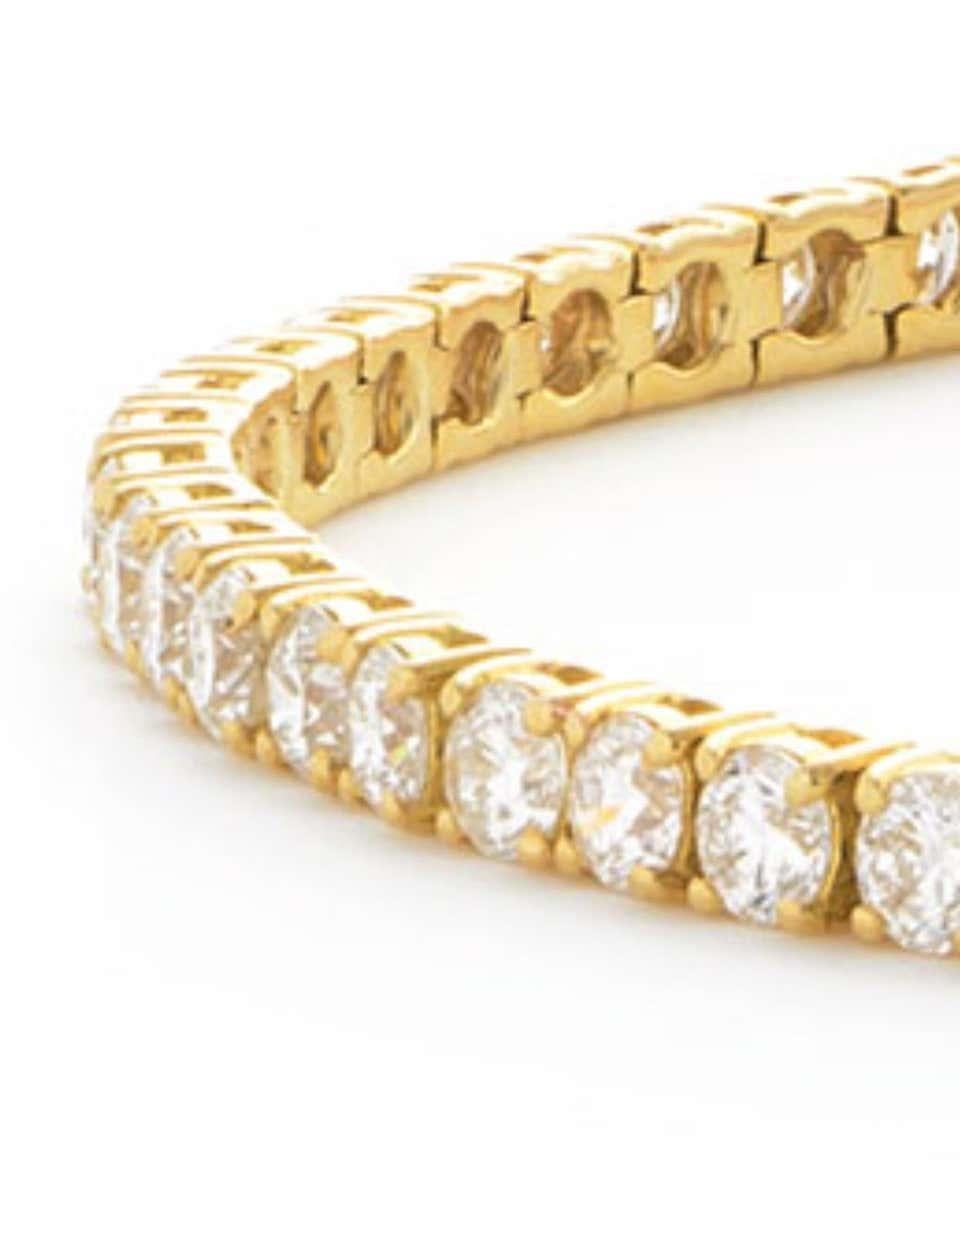 A classic piece that stands the test of time, enjoy the ultimate in luxury and beauty with this gorgeous diamond tennis bracelet, featuring 5.00 Carat of dazzling White Color G Clarity SI1 Round Brilliant Cut diamonds beautifully held in a classic 4